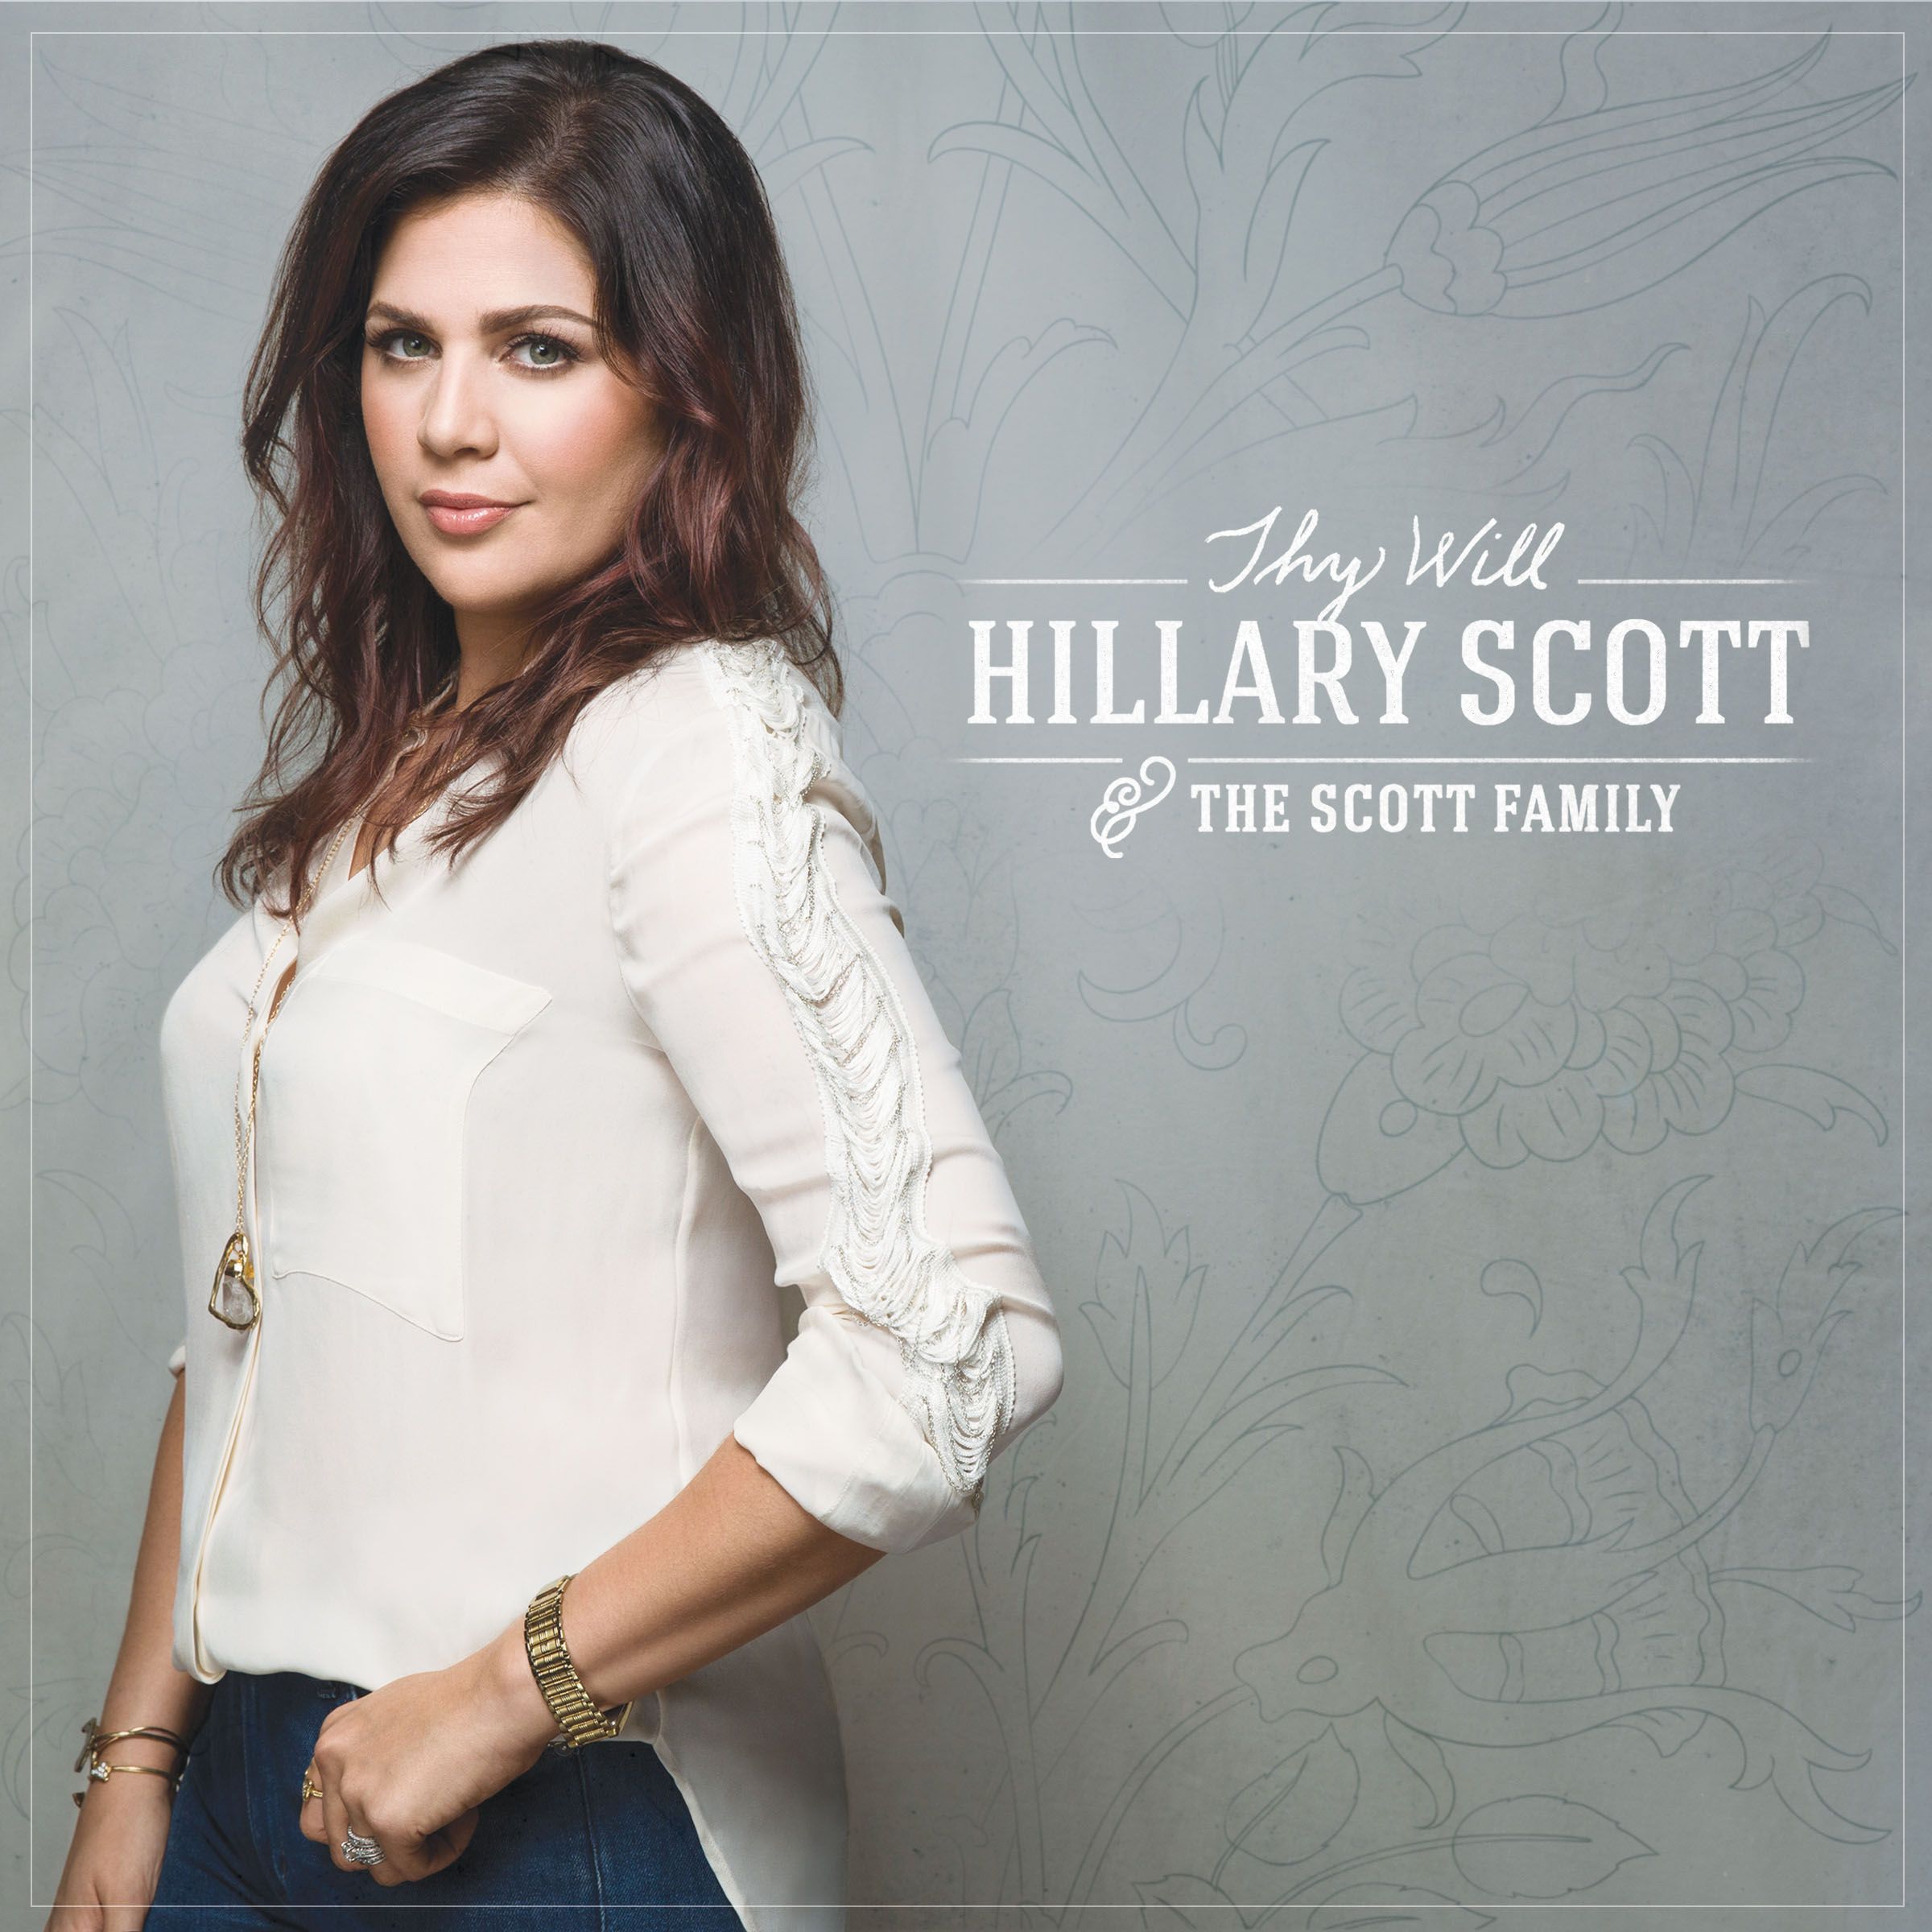 LADY ANTEBELLUM’S HILLARY SCOTT REVEALS DEBUT SINGLE “THY WILL”  OFF UPCOMING FAITH-BASED COLLECTION LOVE REMAINS